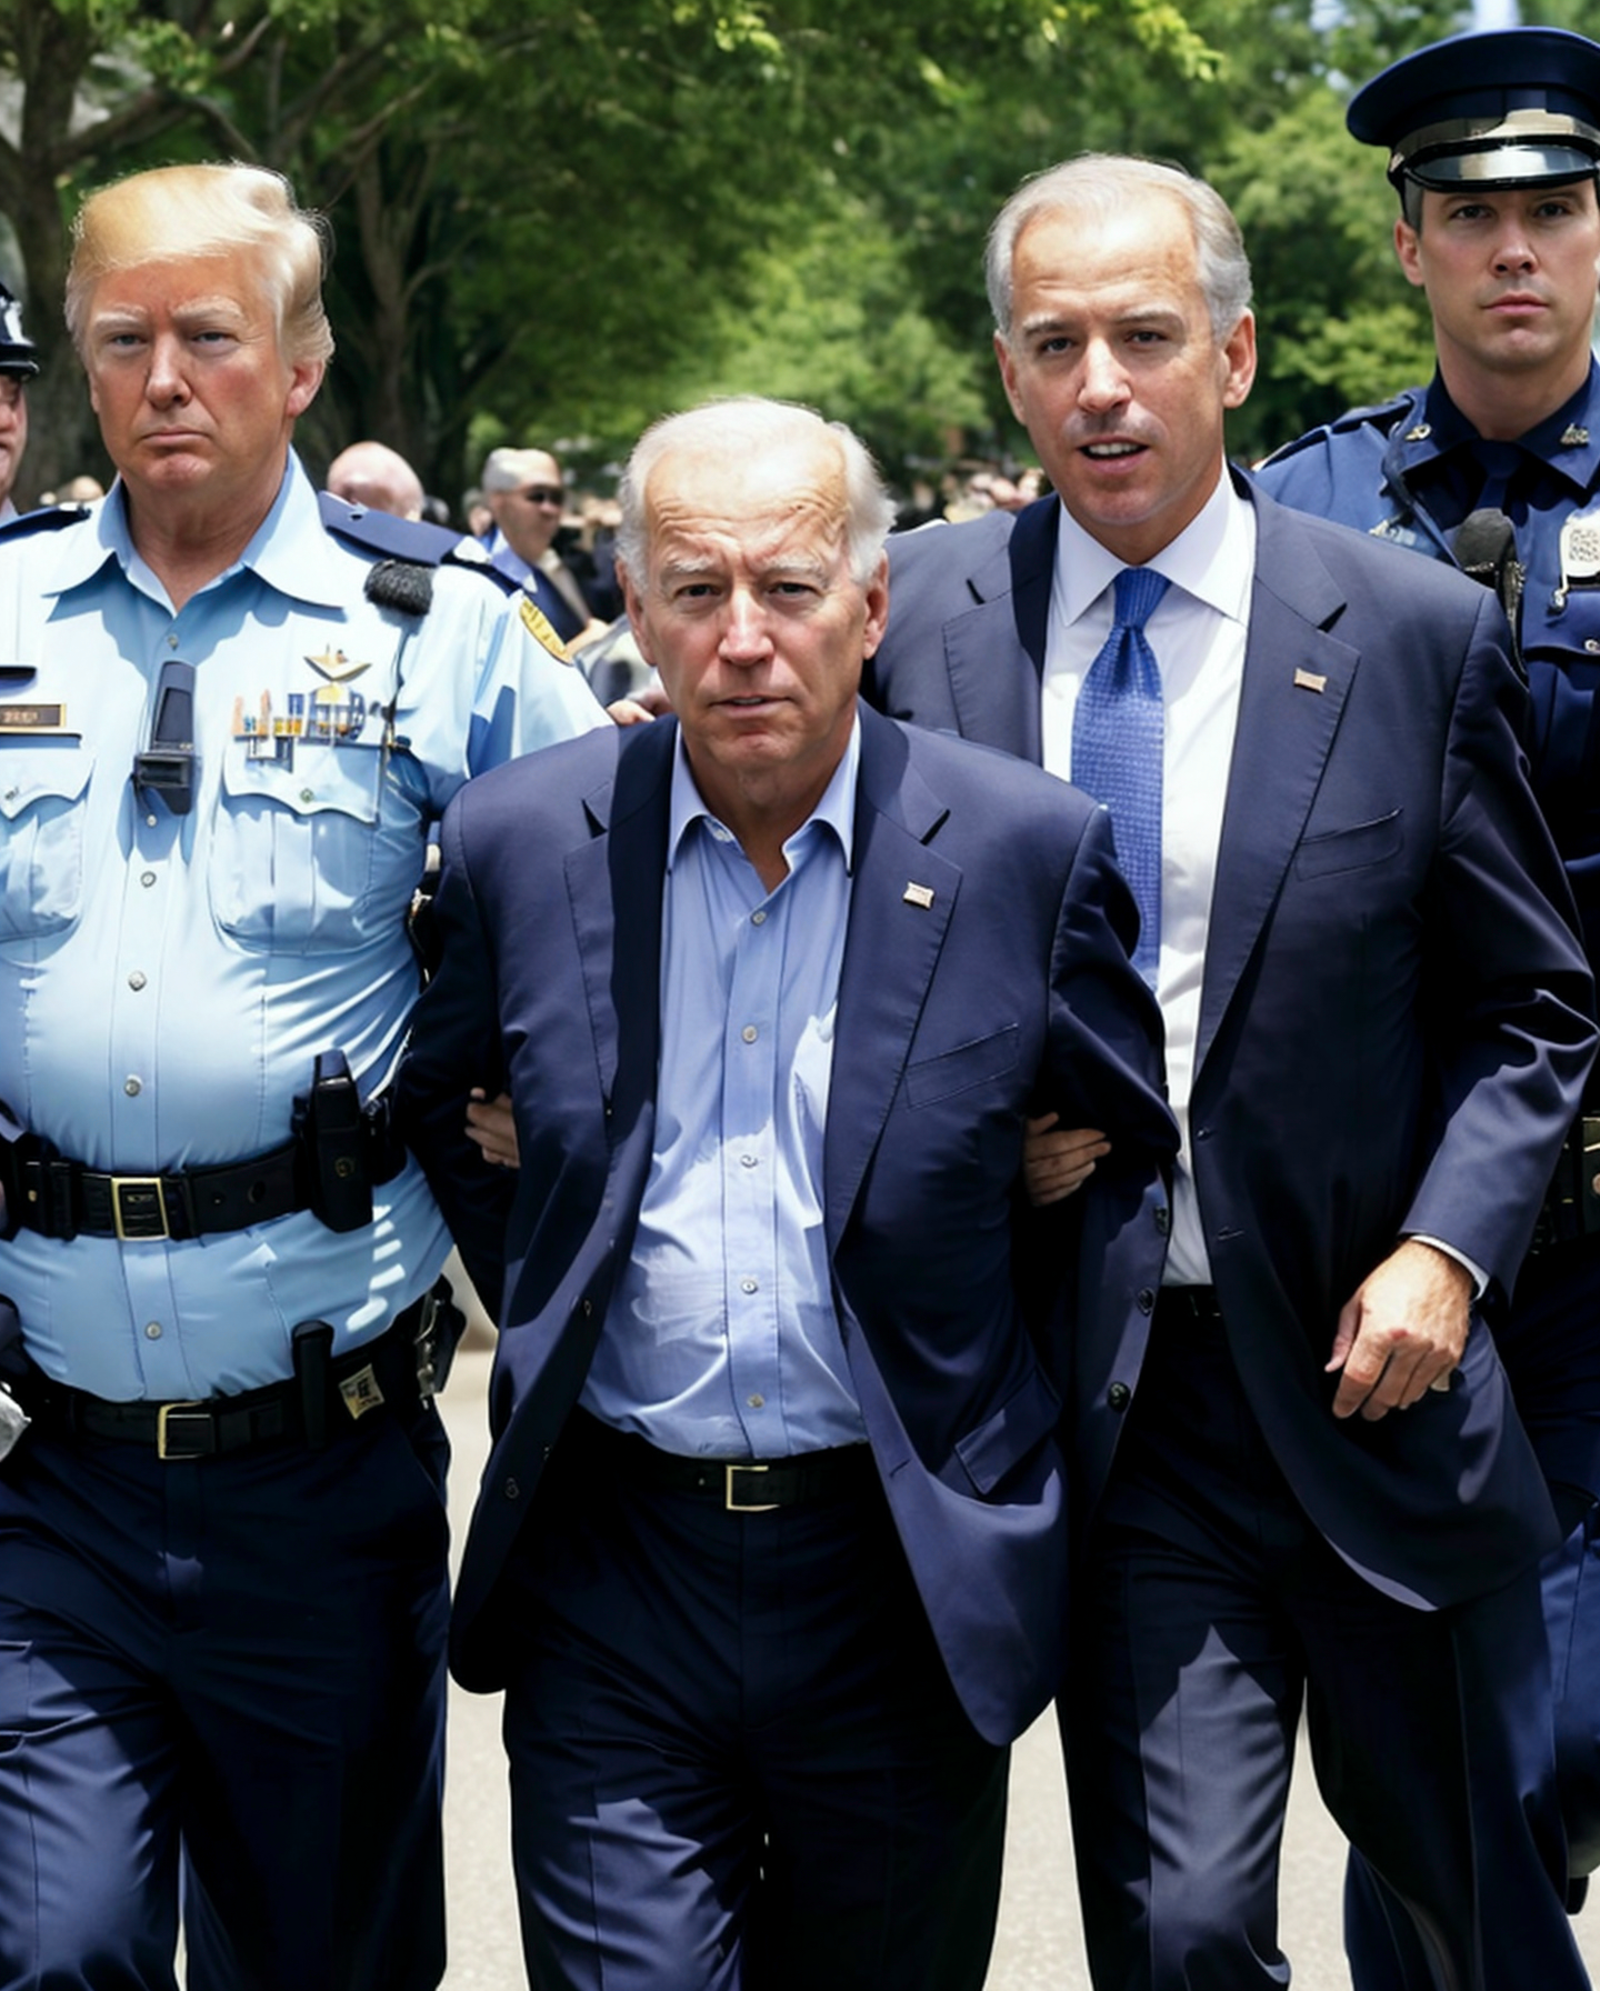 The image shows a group of men, including Joe Biden, being escorted by police officers.